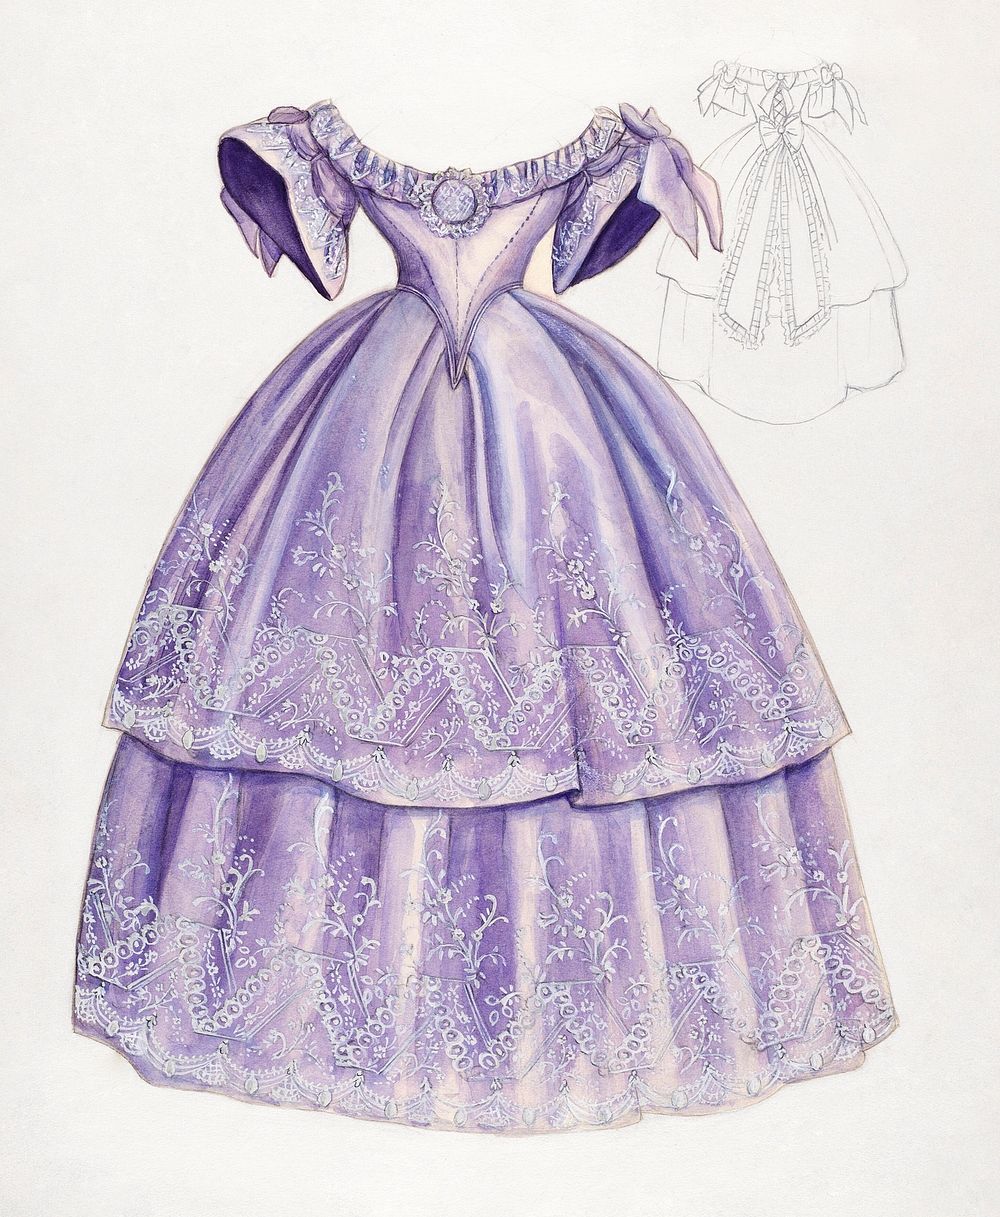 Dress (c. 1936) by Jean Peszel. Original from The National Gallery of Art. Digitally enhanced by rawpixel.